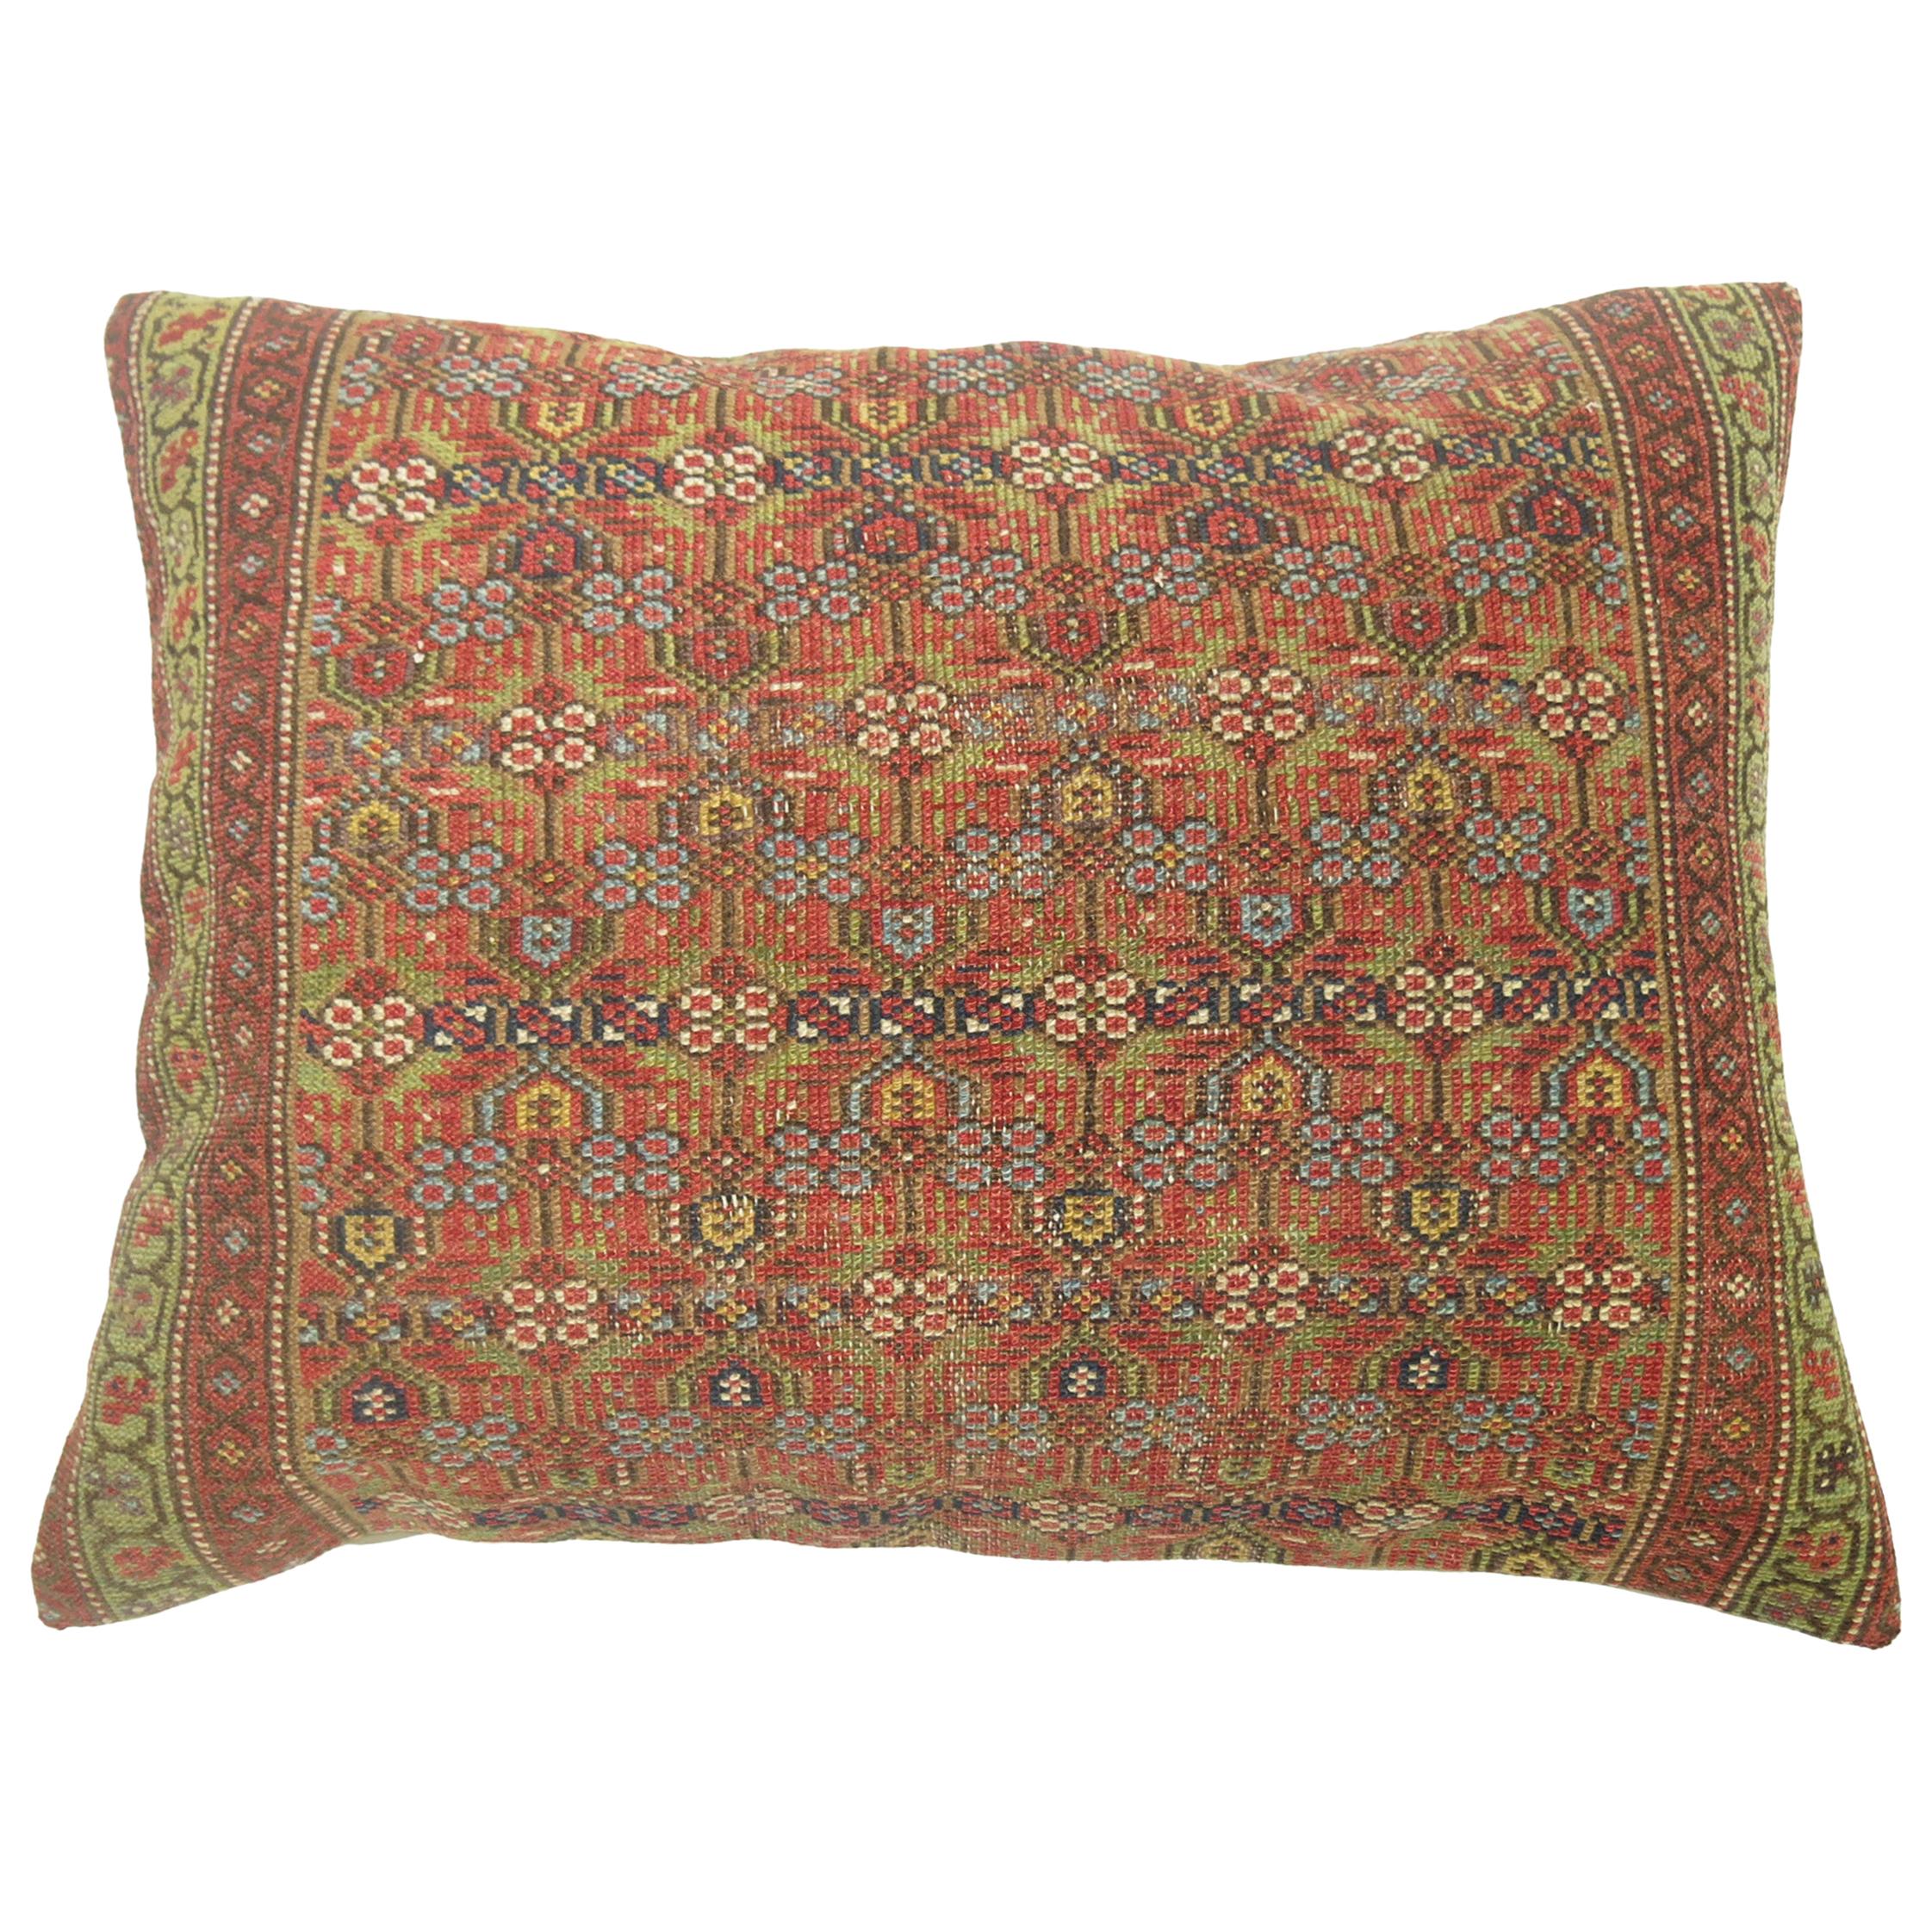 Tribal Antique Persian Floor Rug Pillow For Sale